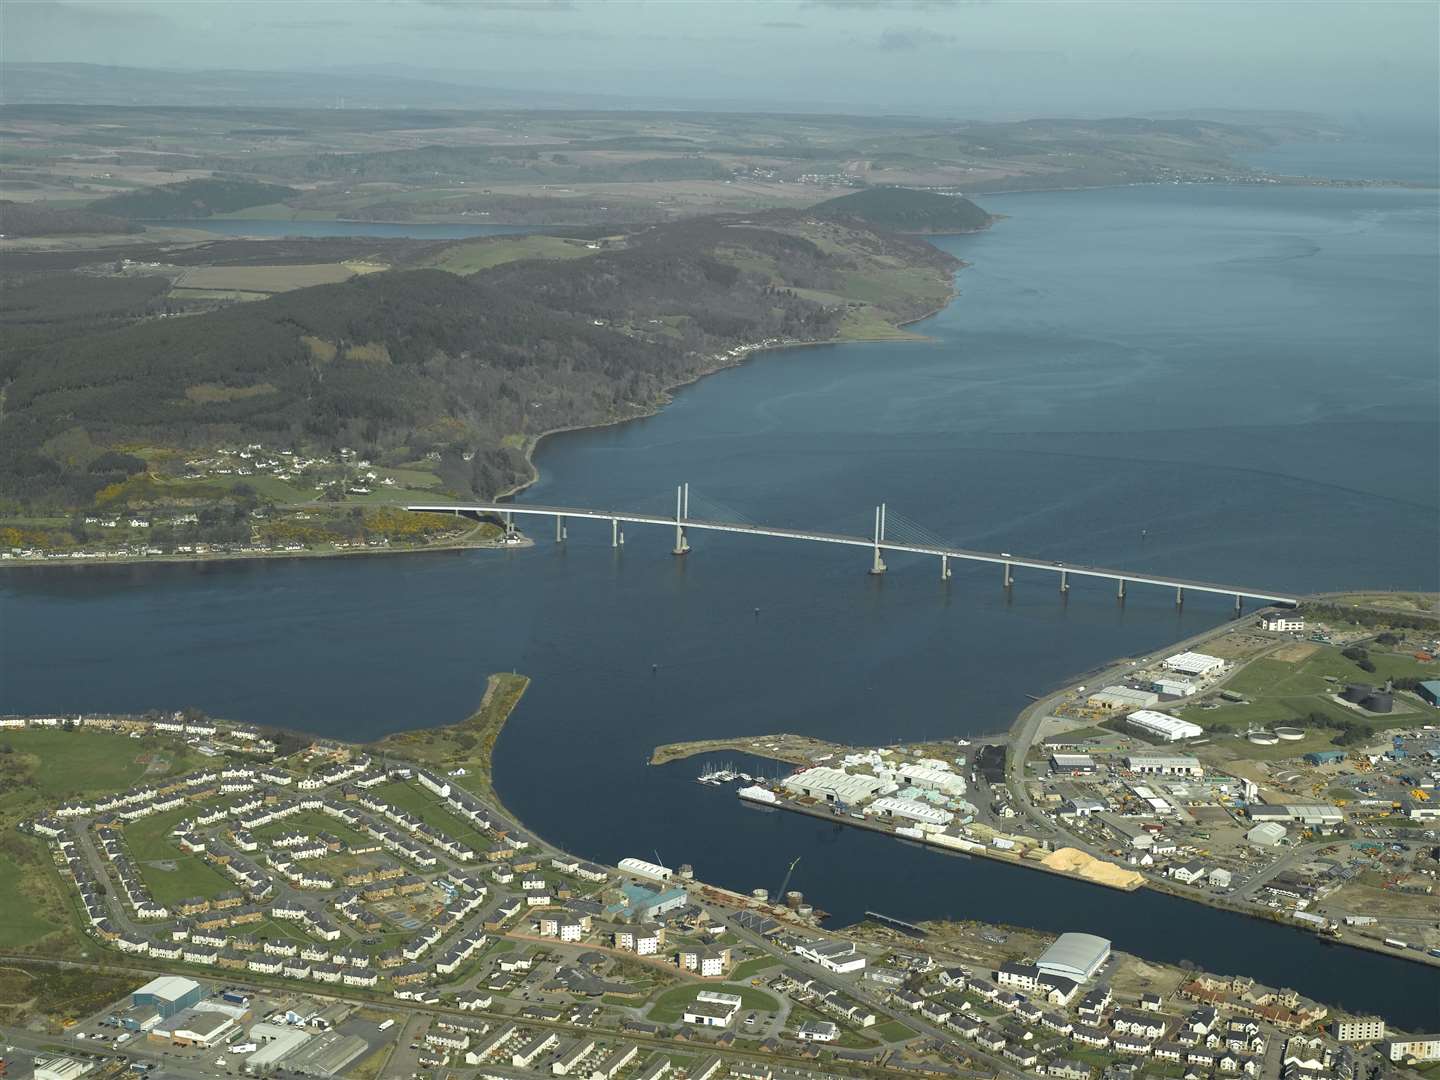 The Kessock Bridge, completed in 1982, was the first multi-cable-stayed bridge to be built in the UK.